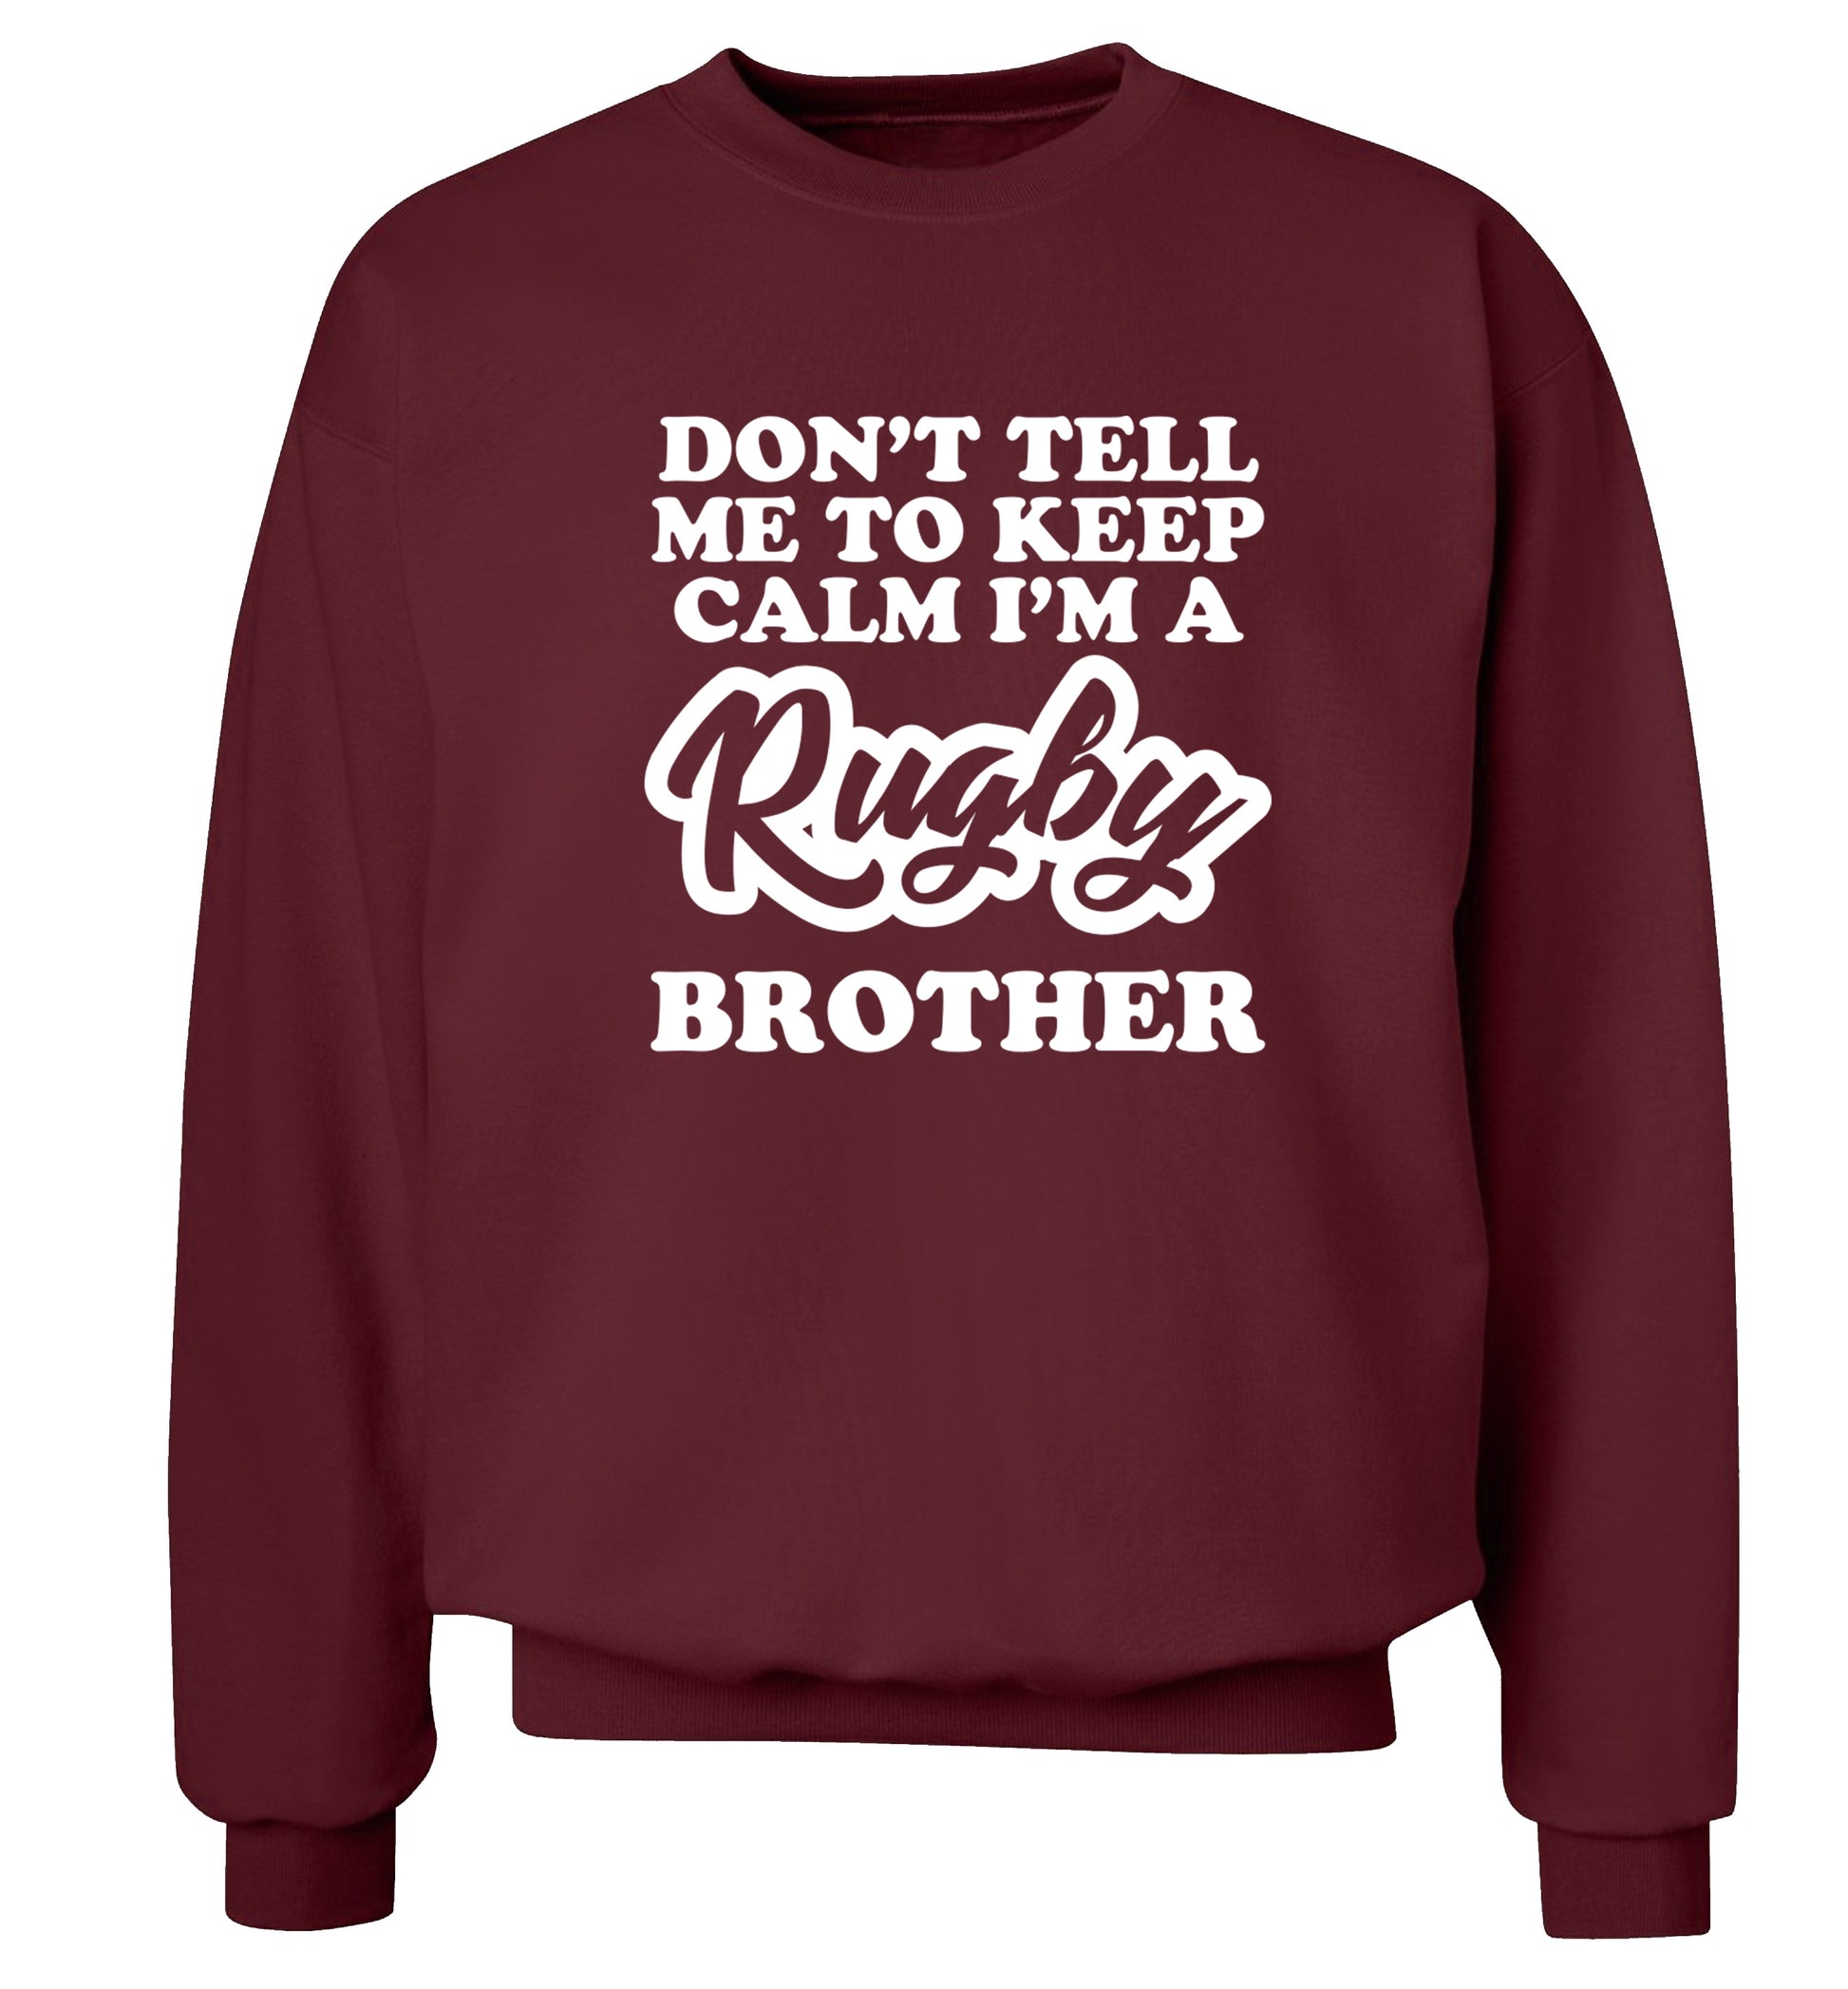 Don't tell me keep calm I'm a rugby brother Adult's unisex maroon Sweater 2XL